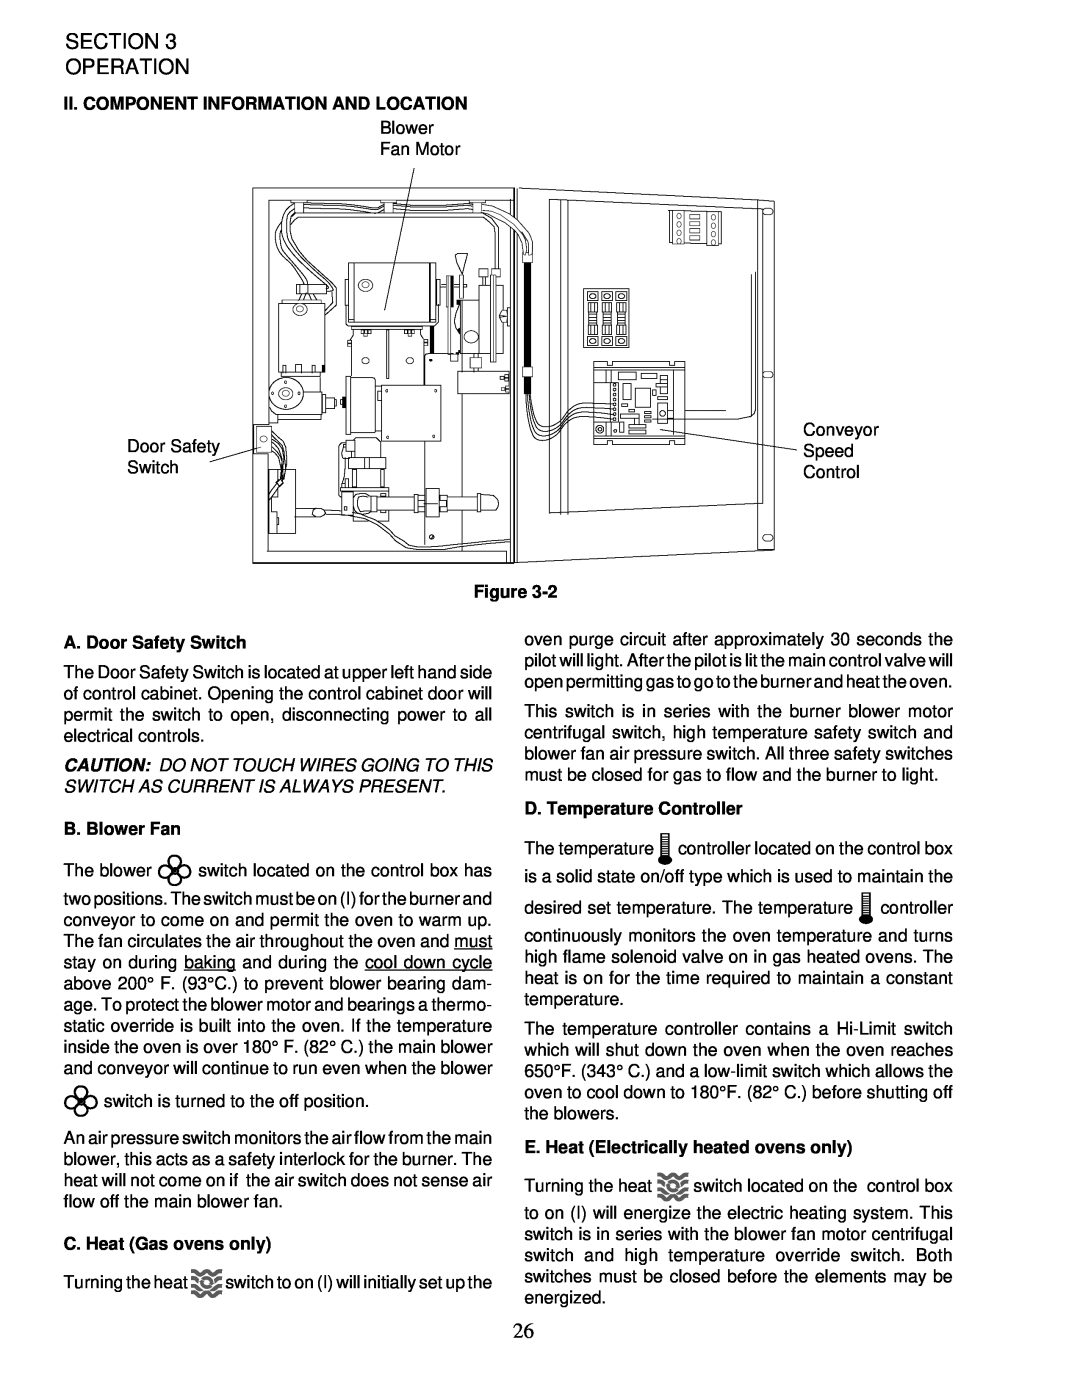 Middleby Marshall PS200-R68 Section Operation, Ii. Component Information And Location, Figure, A. Door Safety Switch 